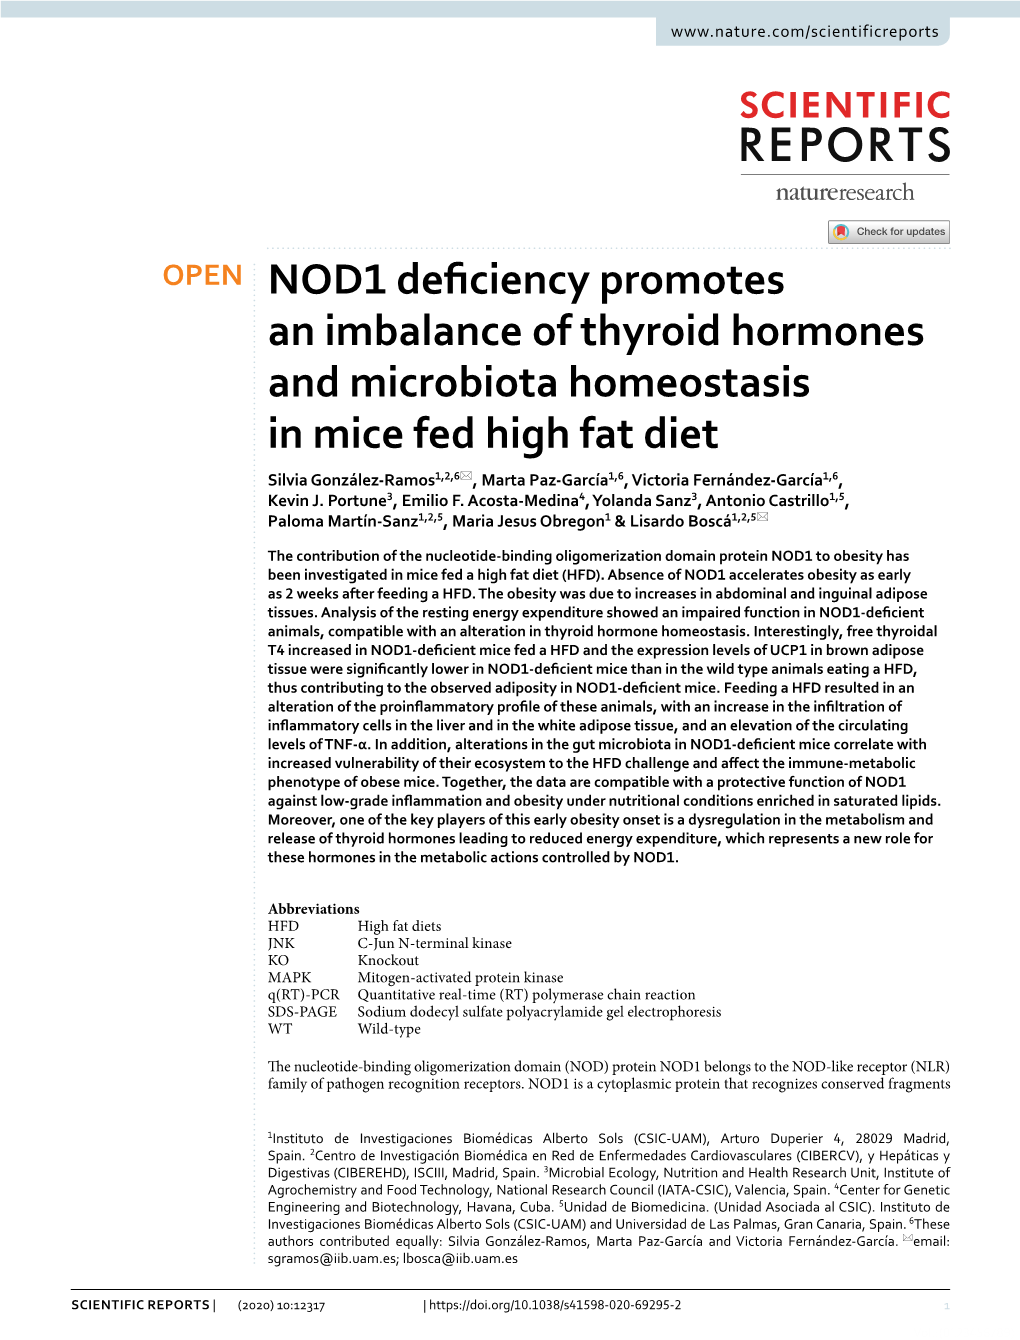 NOD1 Deficiency Promotes an Imbalance of Thyroid Hormones And